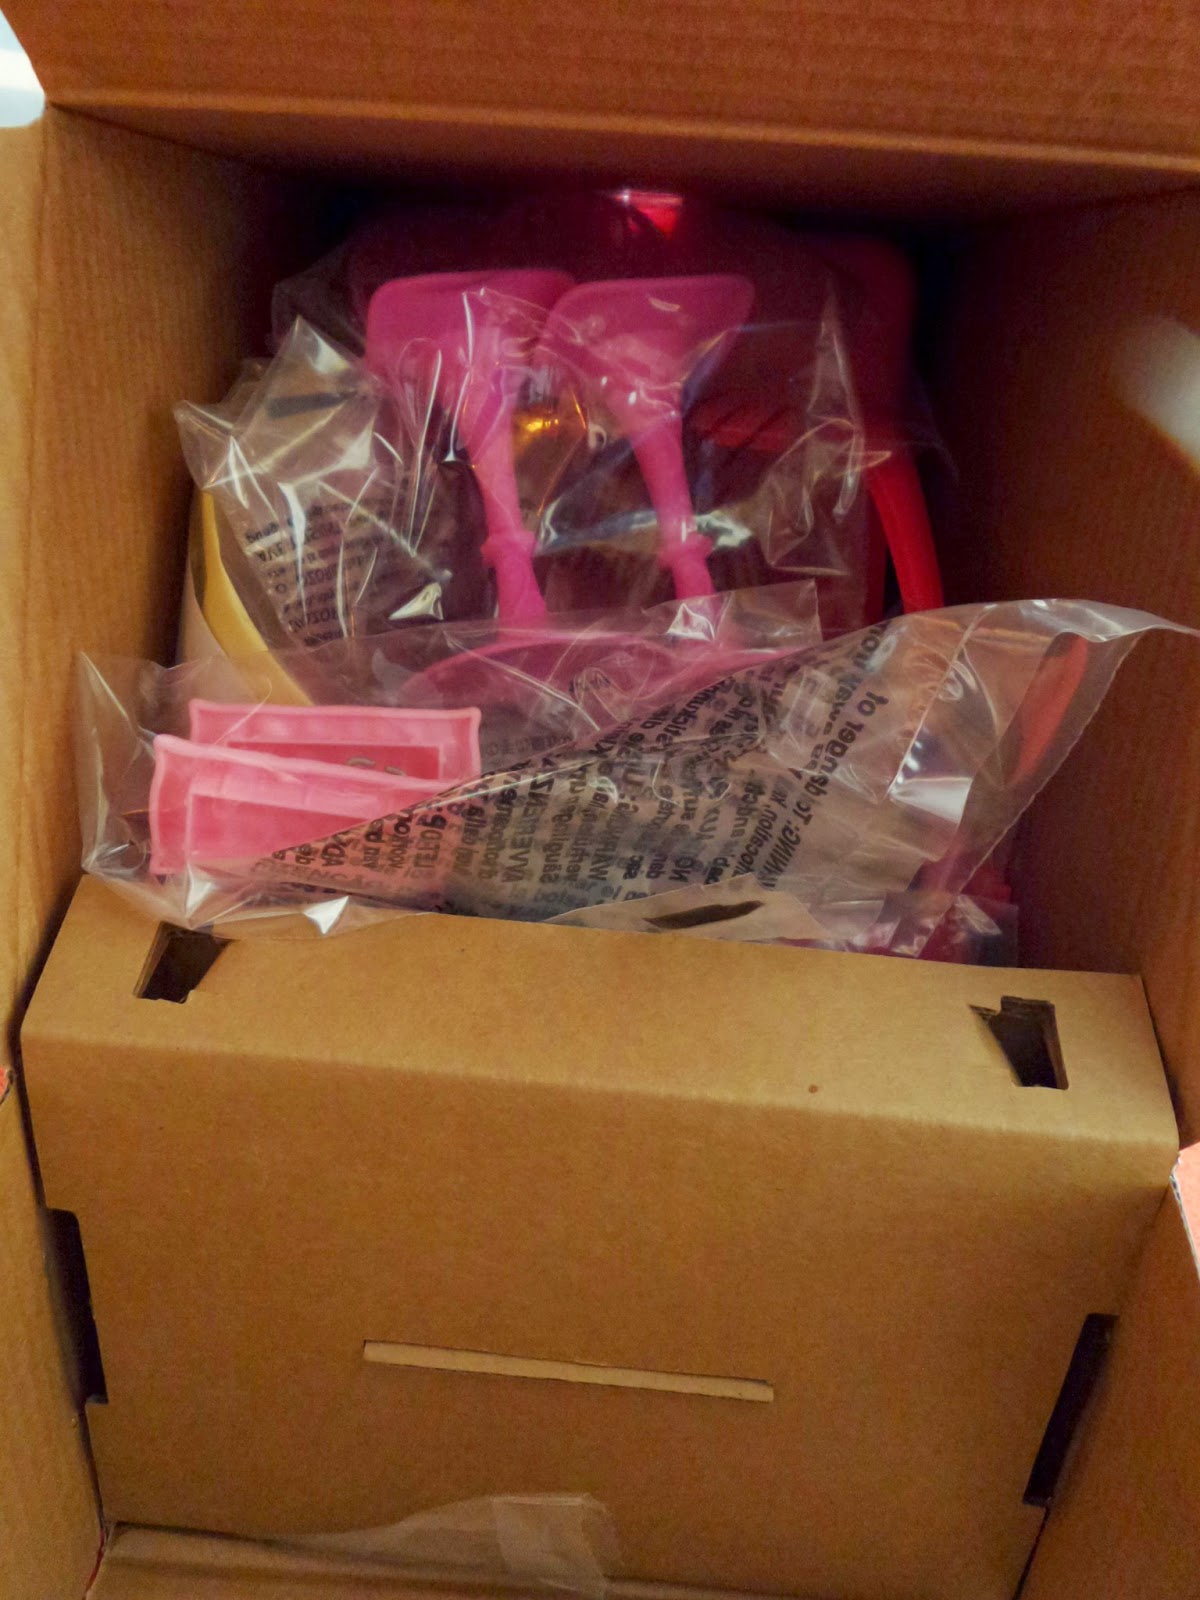 Barbie Glam Camper Inside the Box #Review